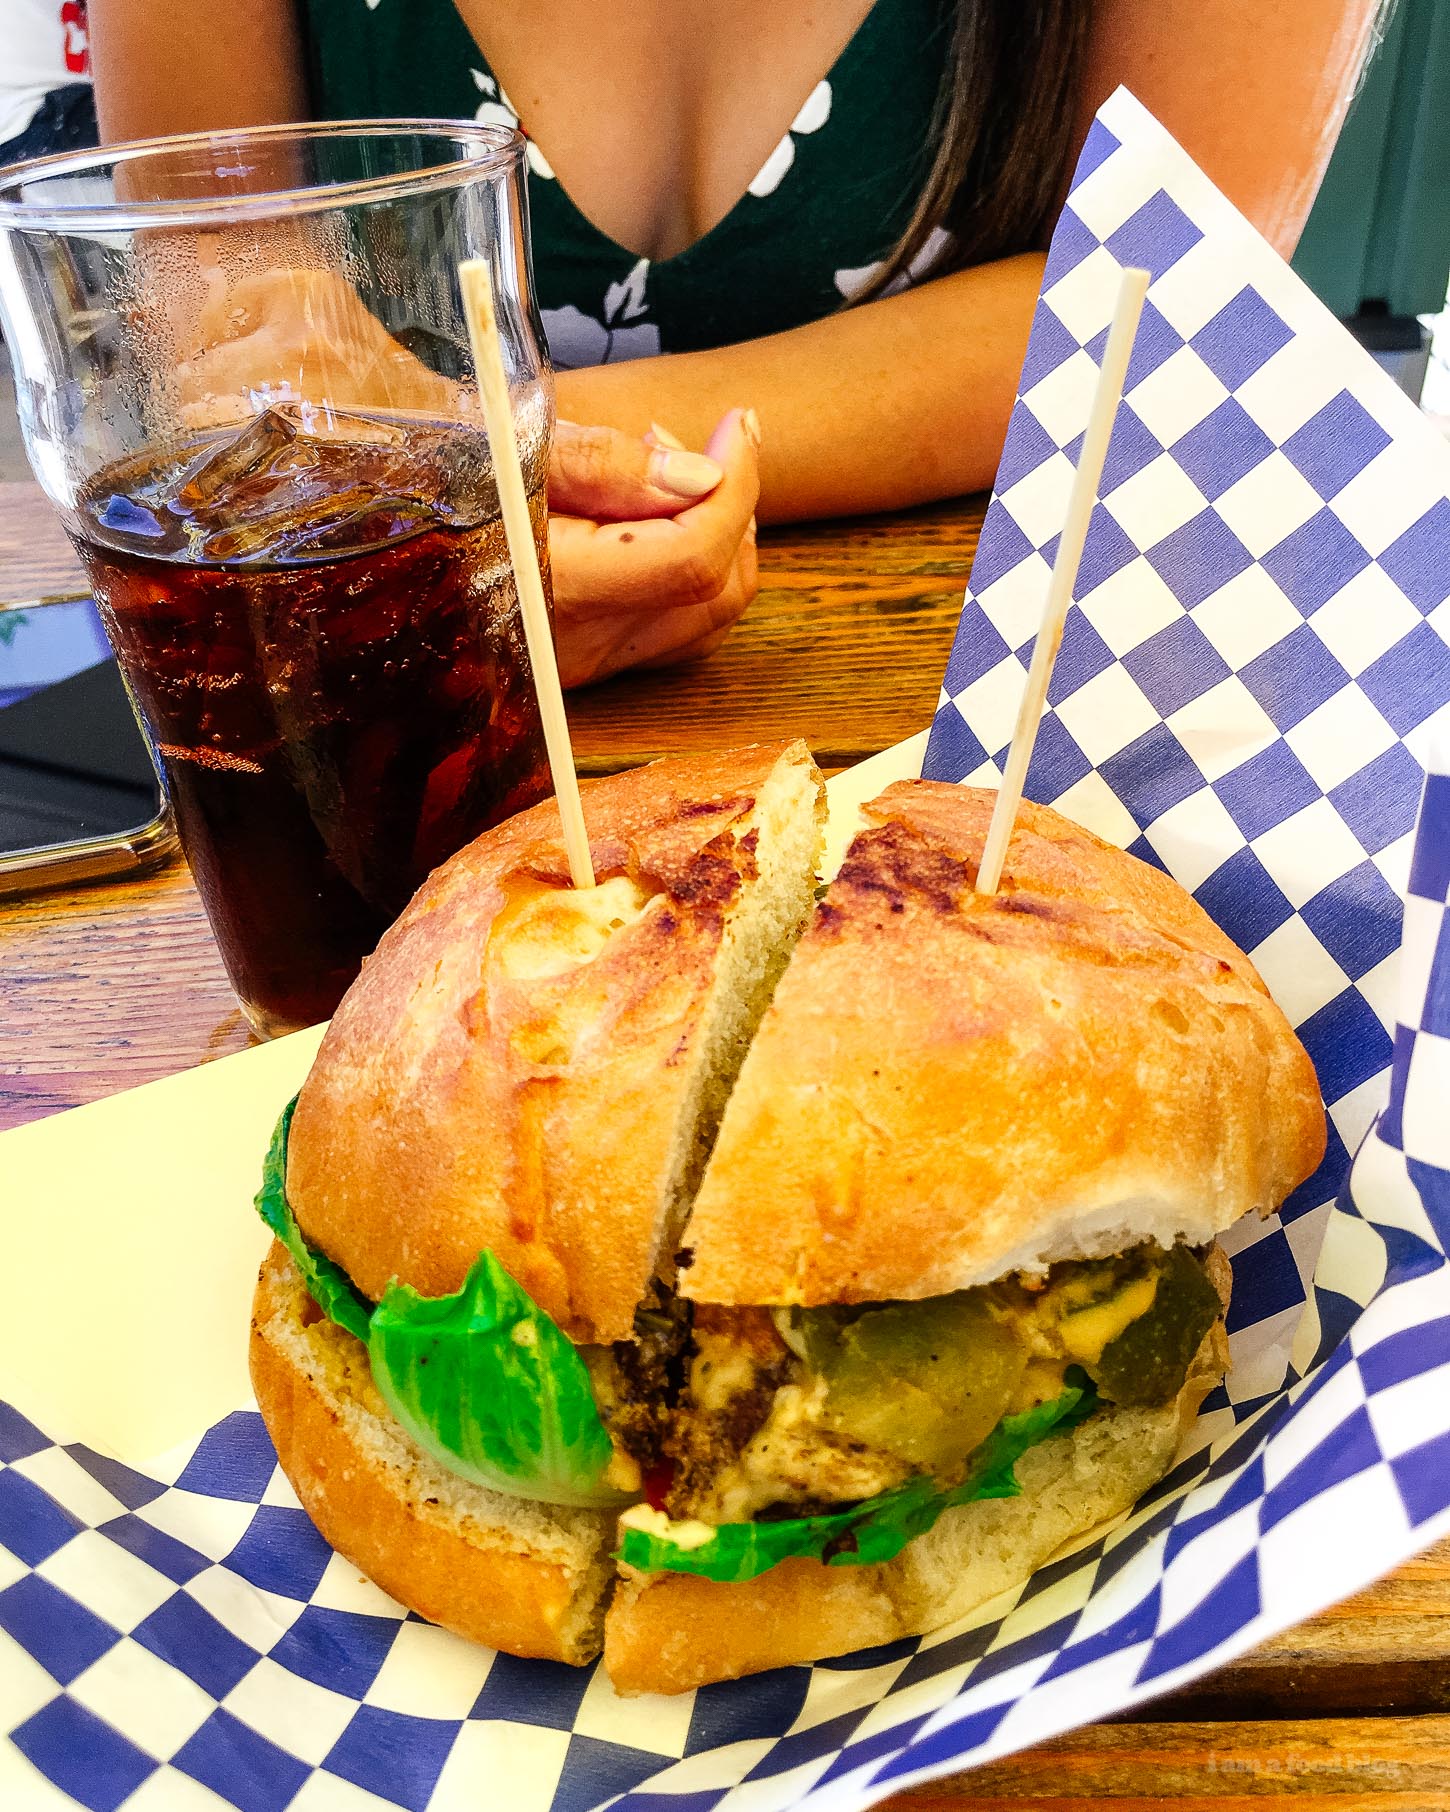 We went on the search for the best green chile cheeseburger in New Mexico #travel #newmexico #greenchile #greenchilecheeseburger #wheretoeat #wheretoeatnewmexico